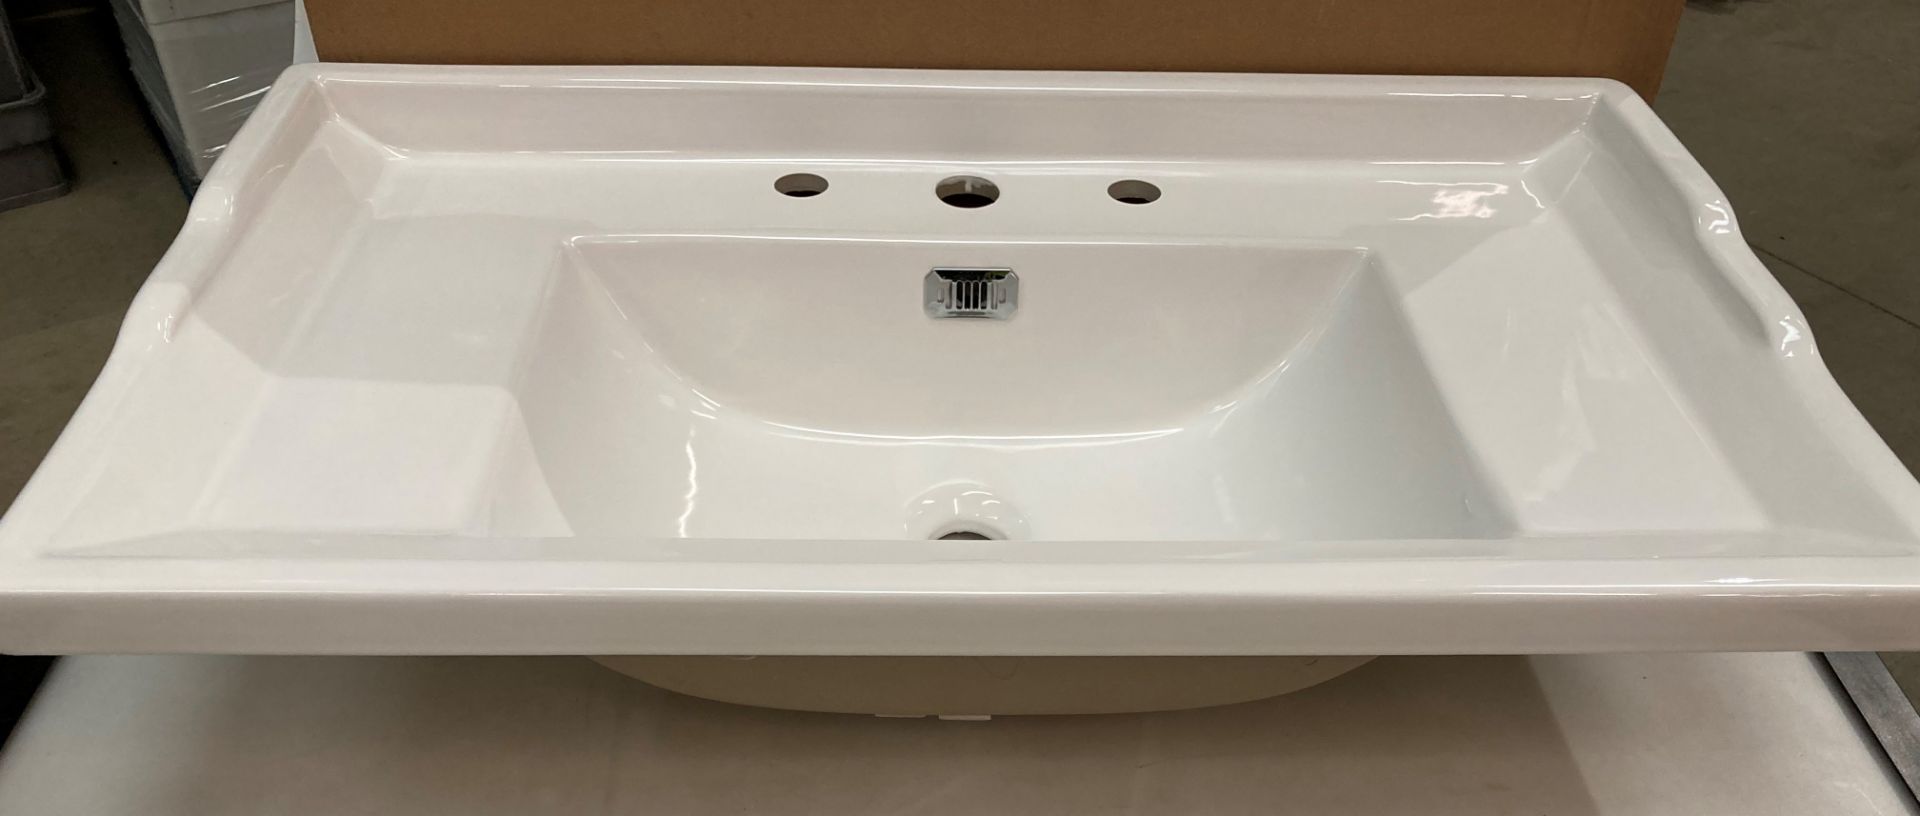 2 x 800mm traditional basin 3T/H size 820mm x 480mm x 220mm - Image 2 of 2